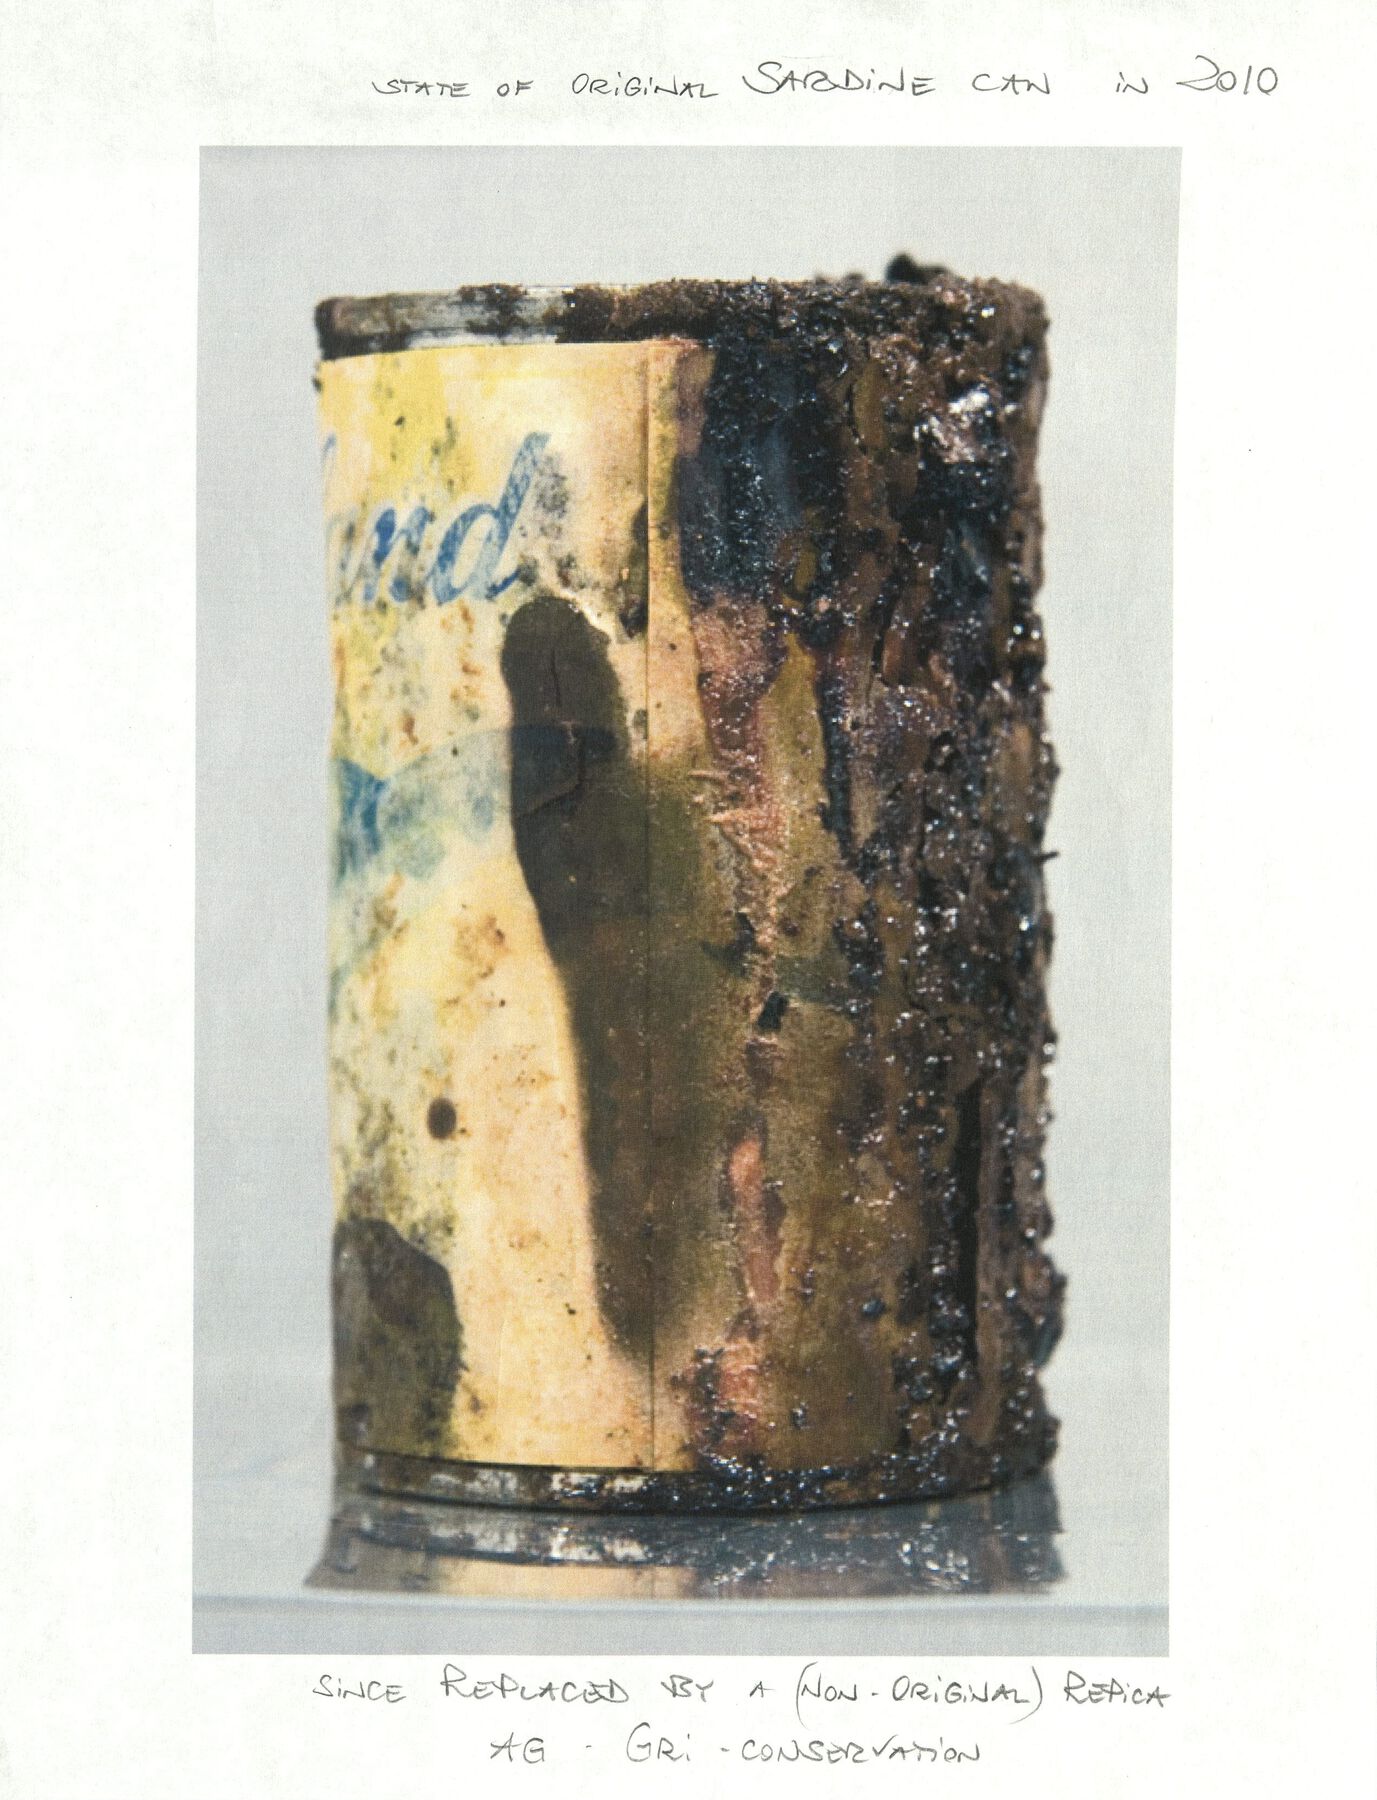 A yellow sardine can, with soggy deteriorating mold coming from its right side